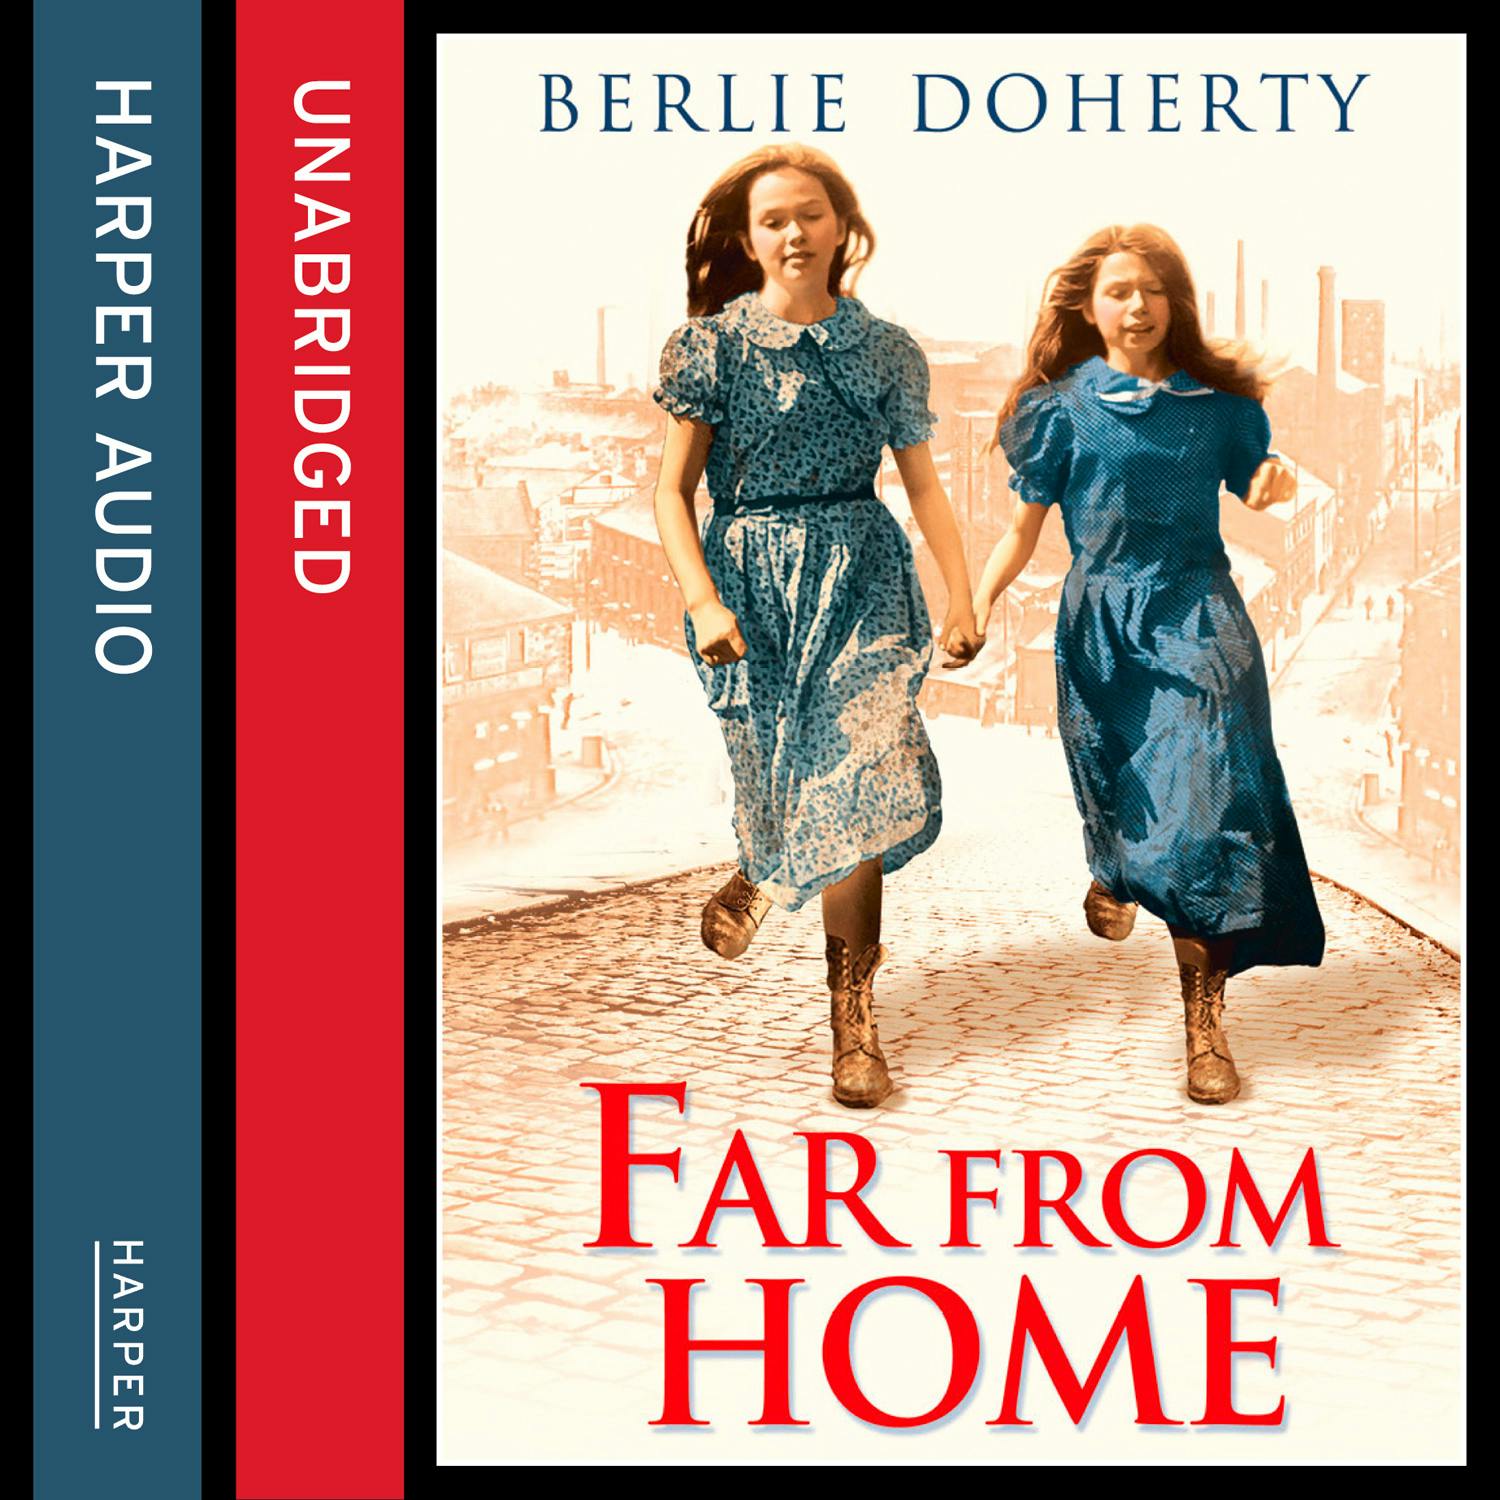 Far From Home: The sisters of Street Child (Street Child) - Berlie Doherty